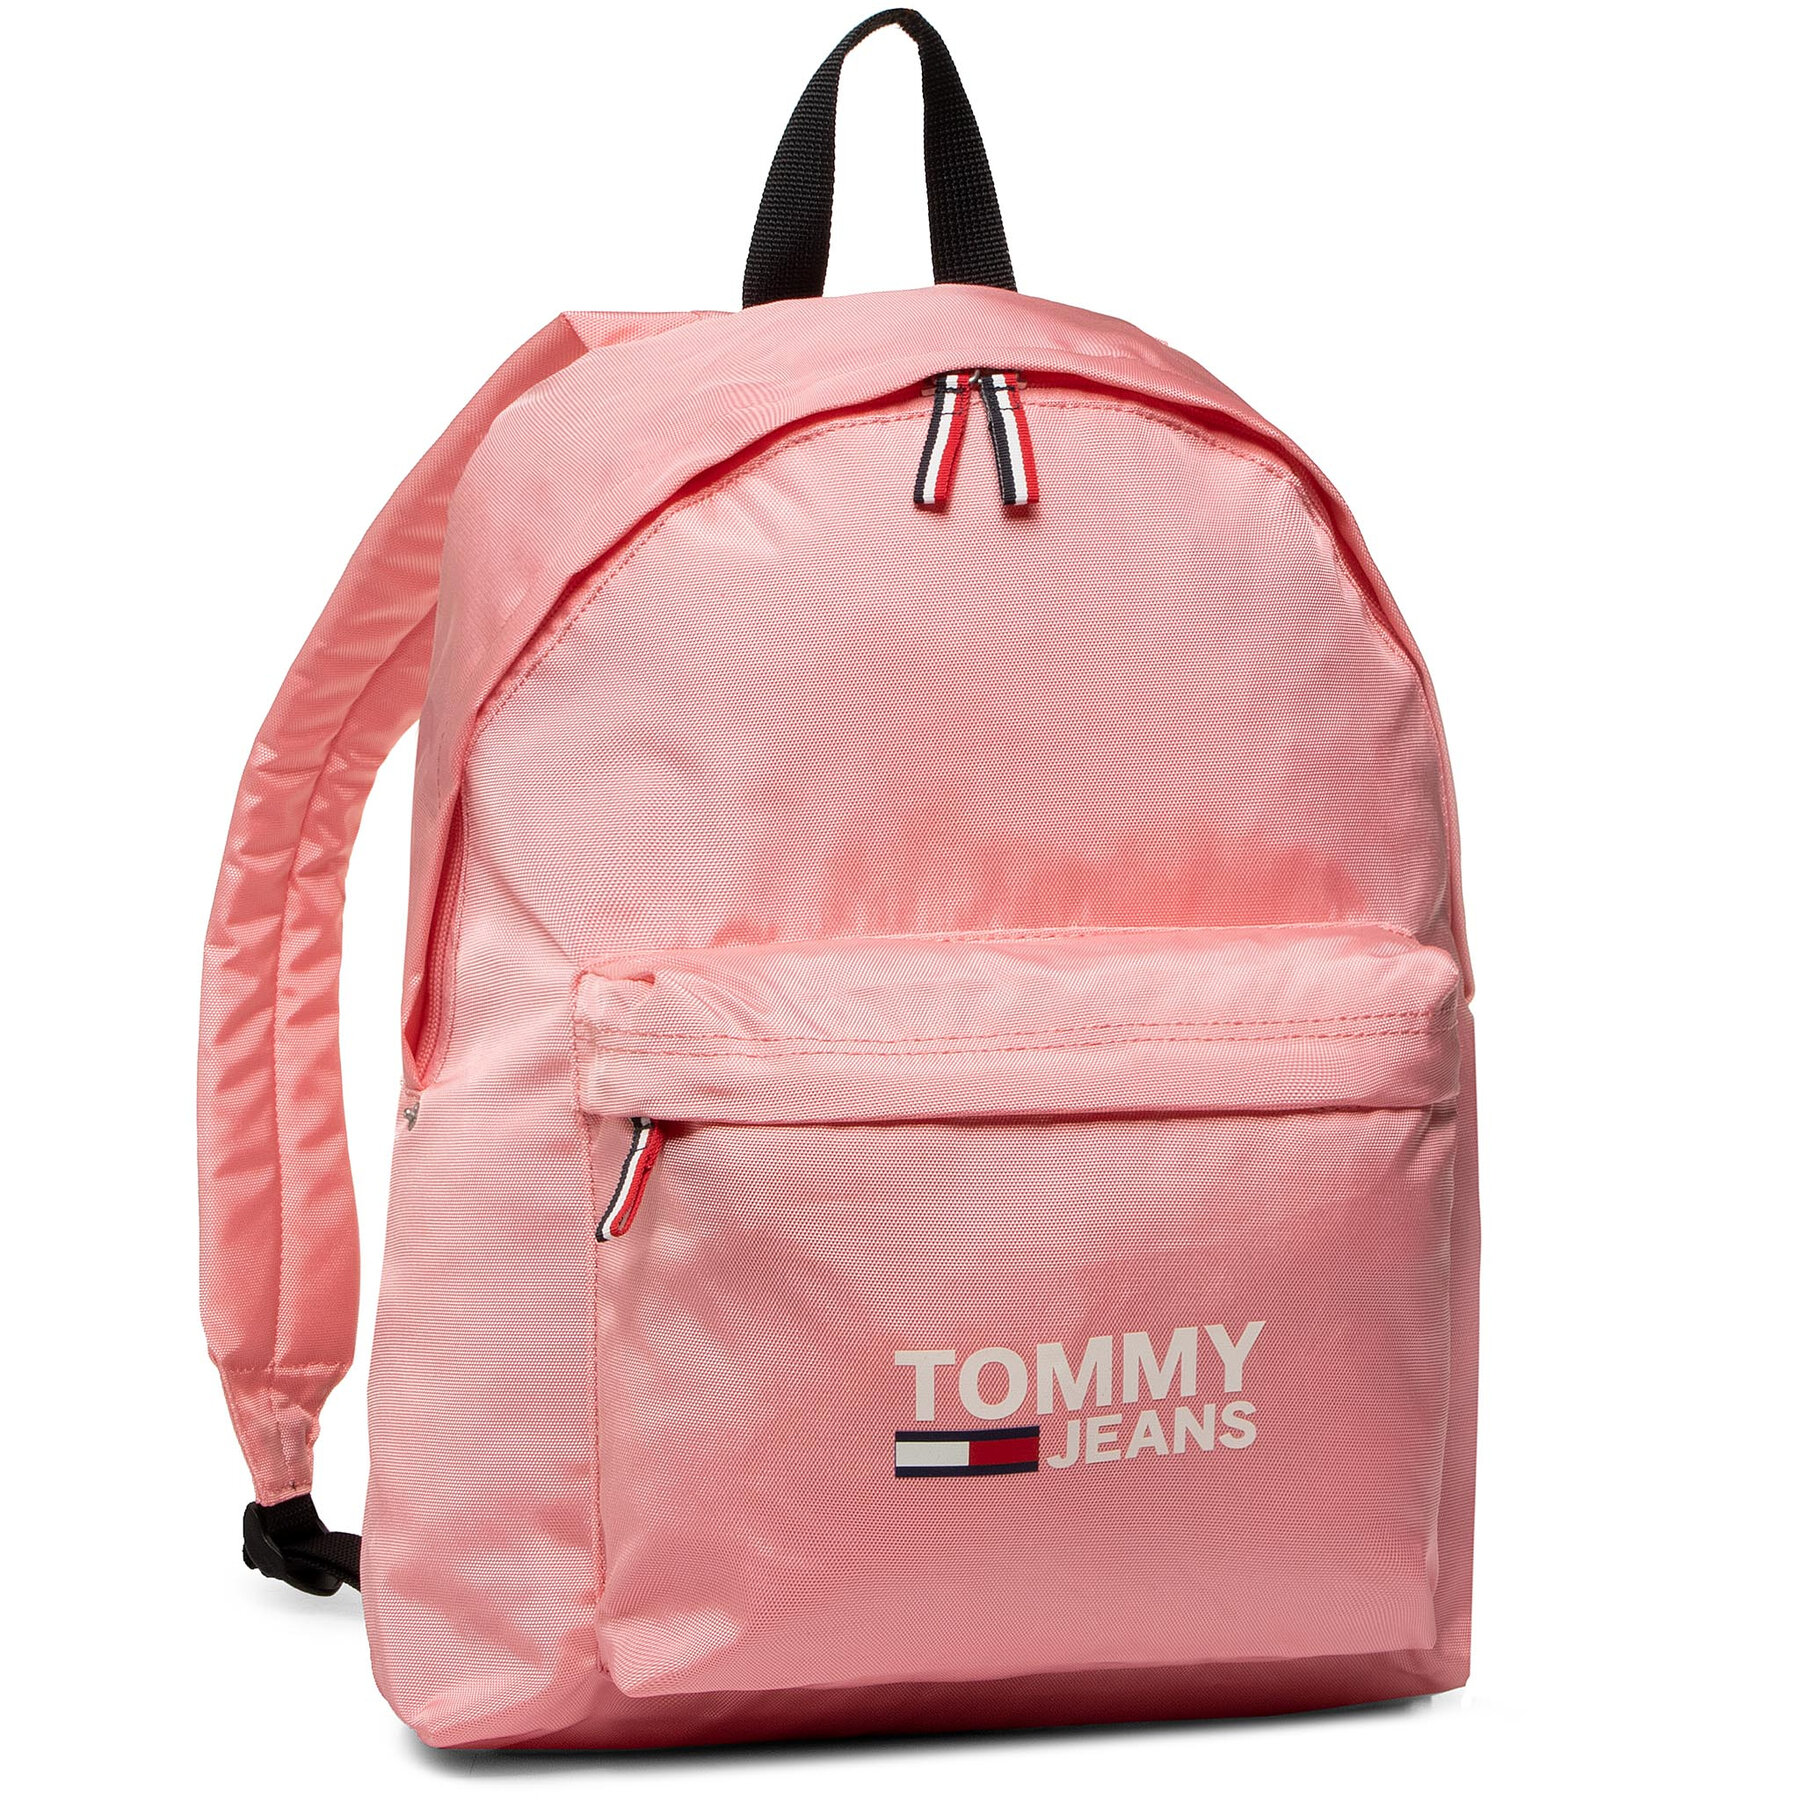 Tommy Hilfiger TJW Cool City Backpack pink icing (AW0AW07632) - Mochilas